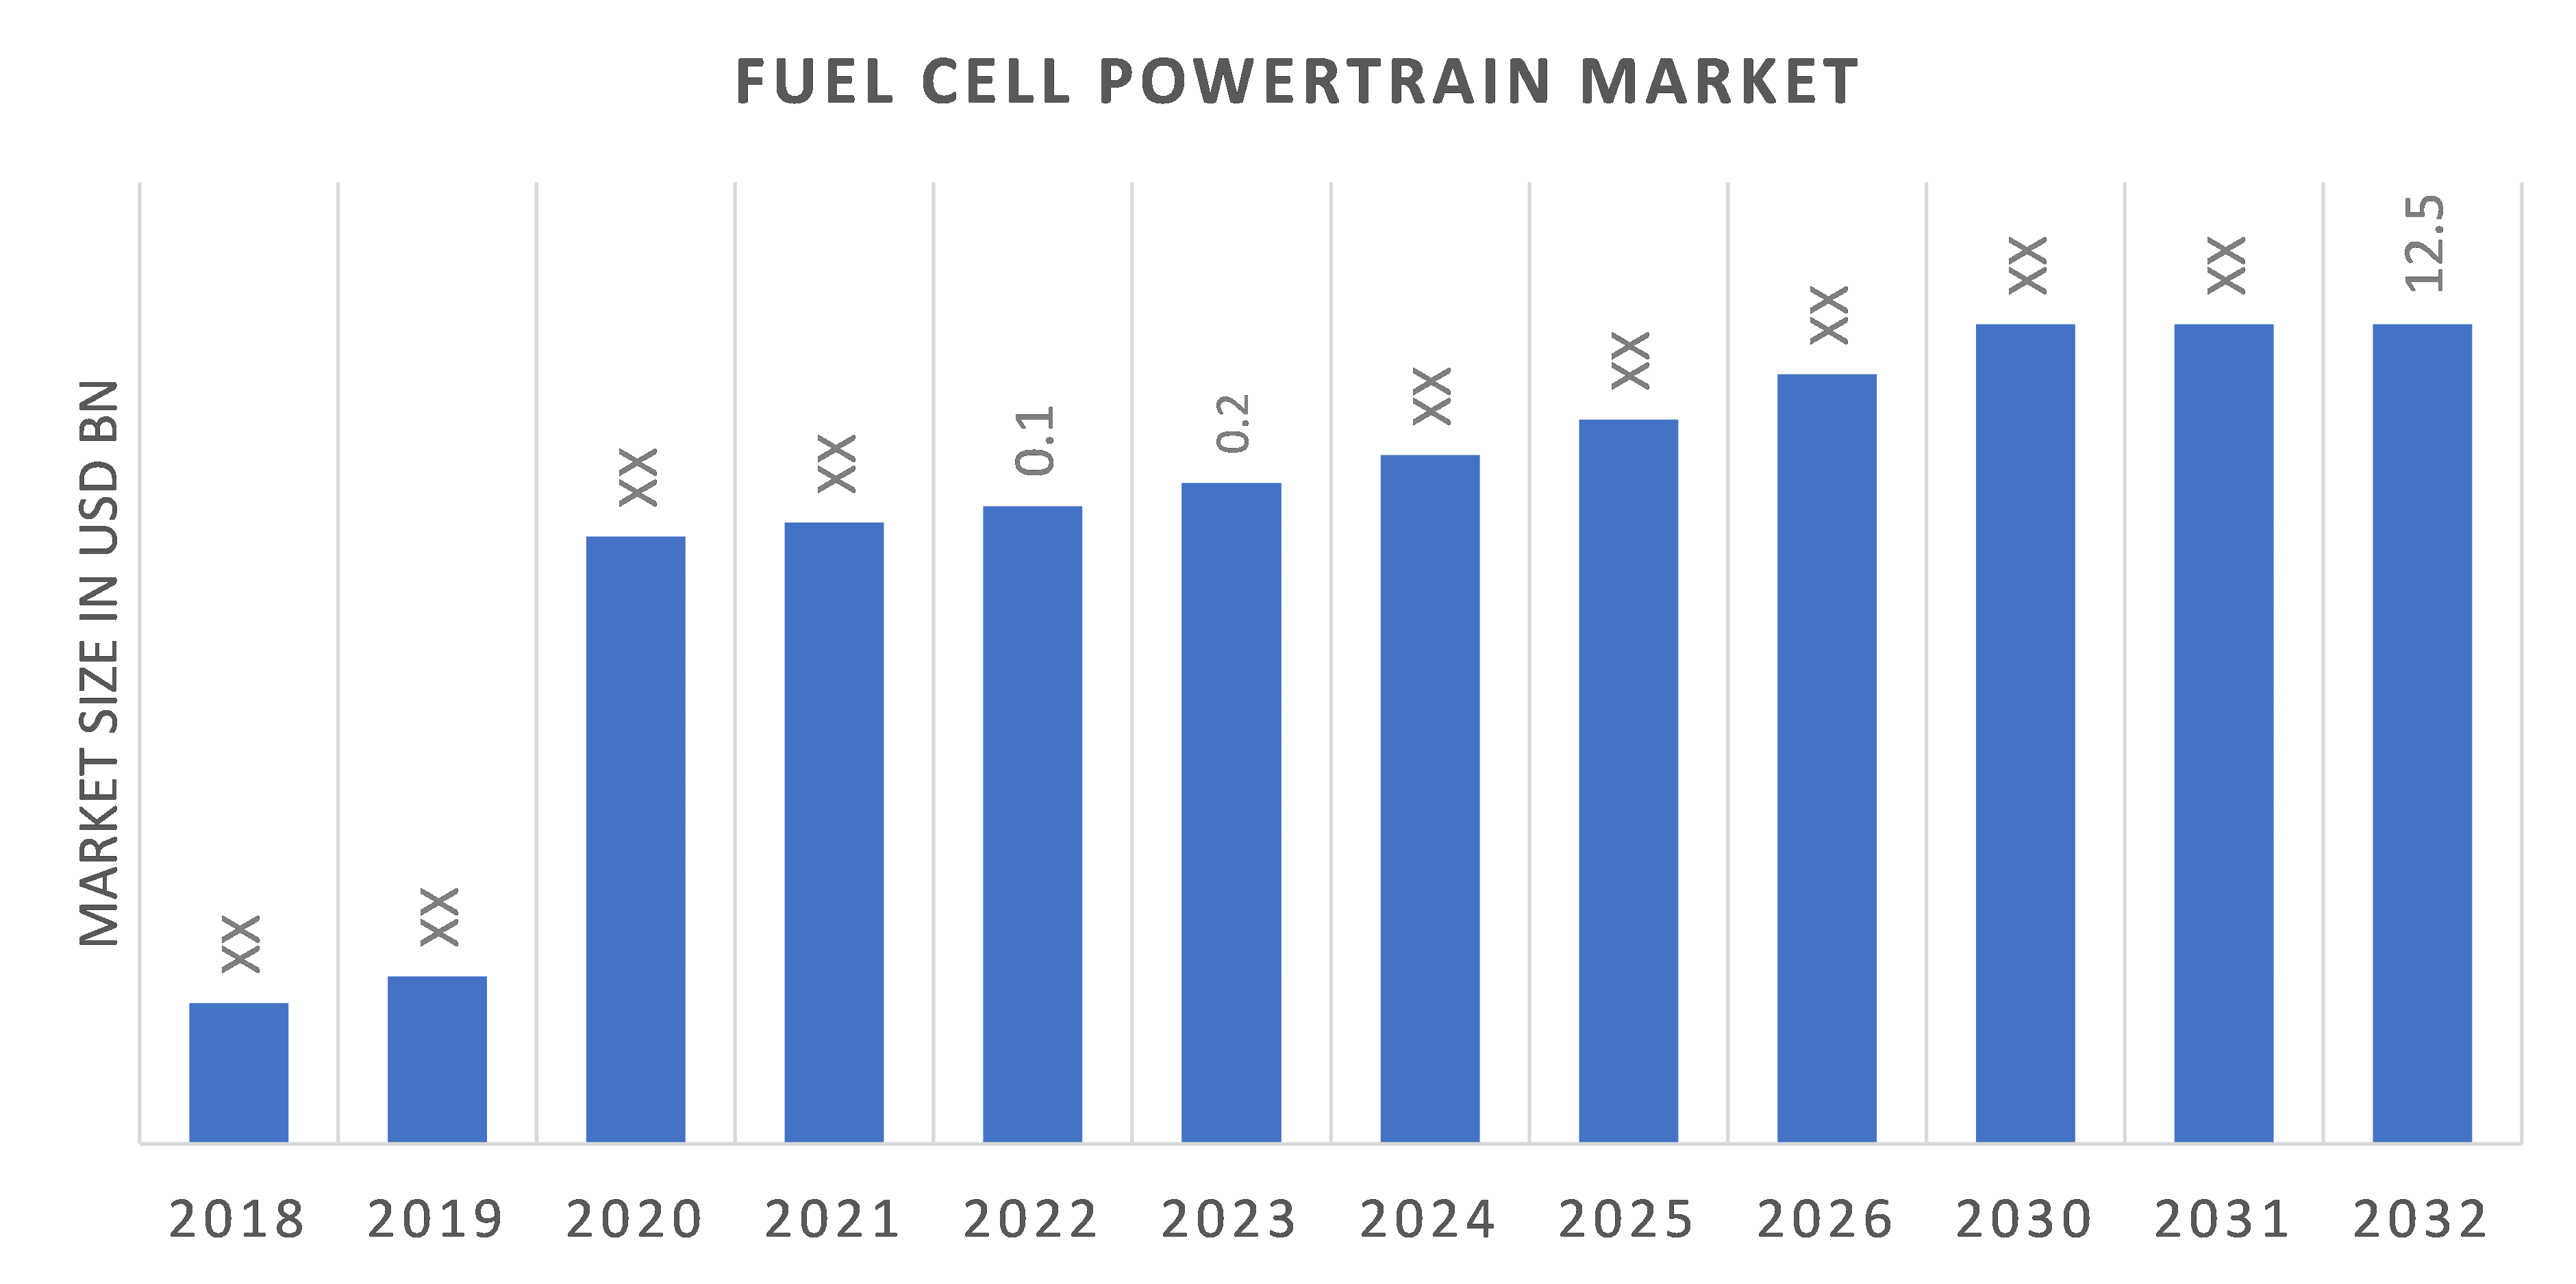 Fuel Cell Powertrain Market Overview